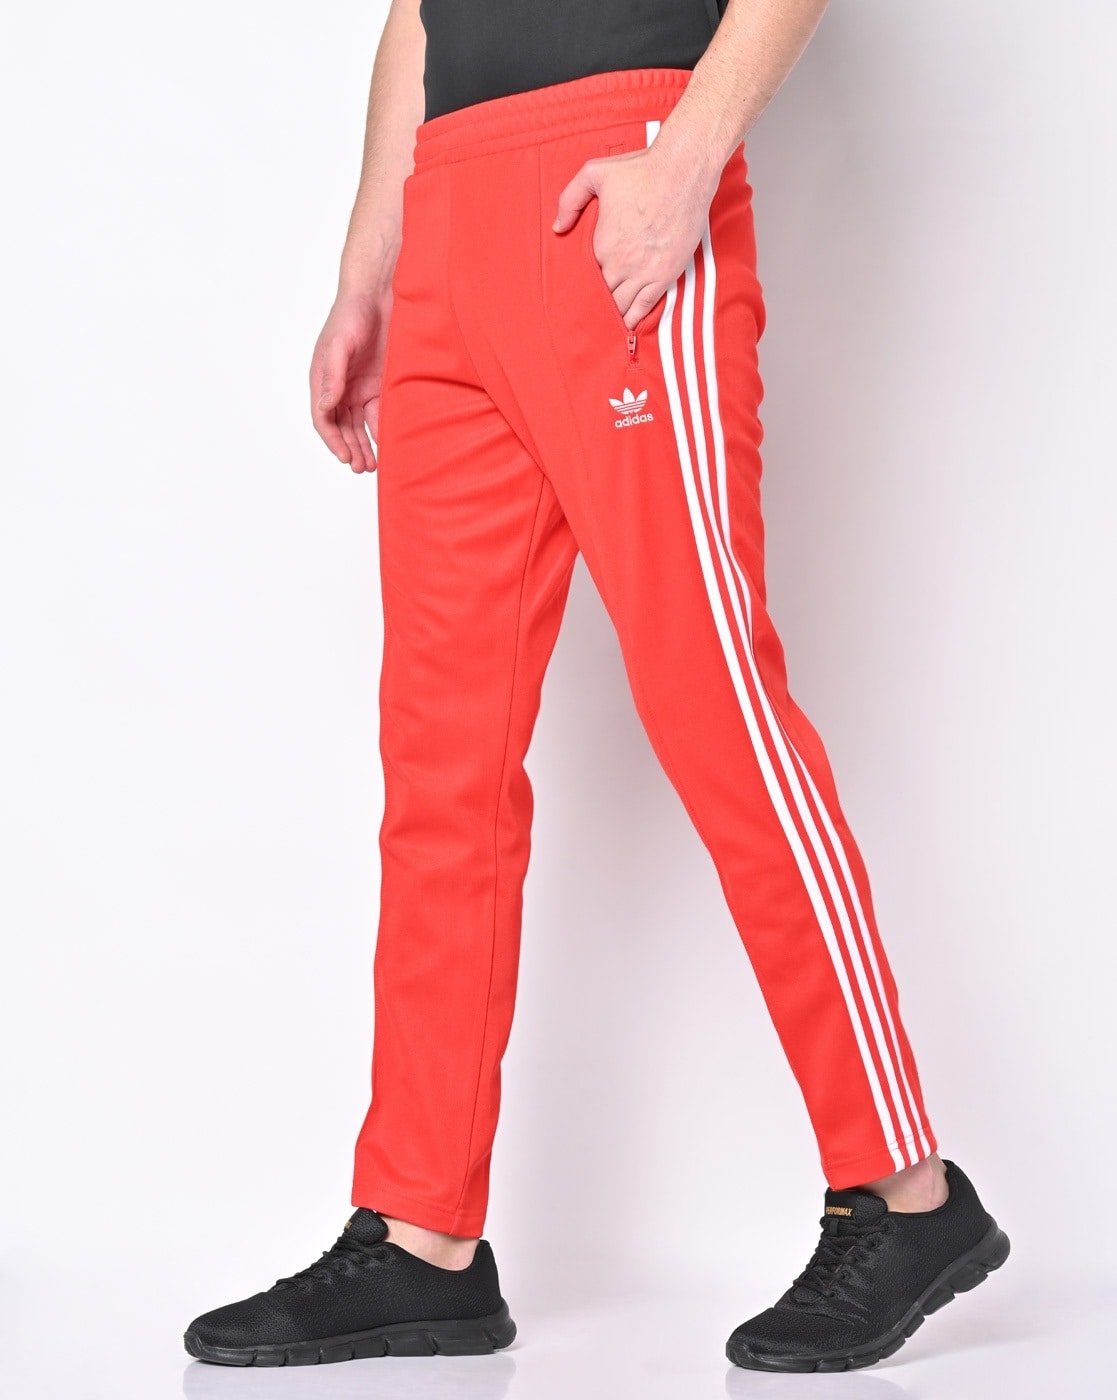 CUTOMISED Mens Apparels Adidas Track Pants For Casual Size Sxxxl